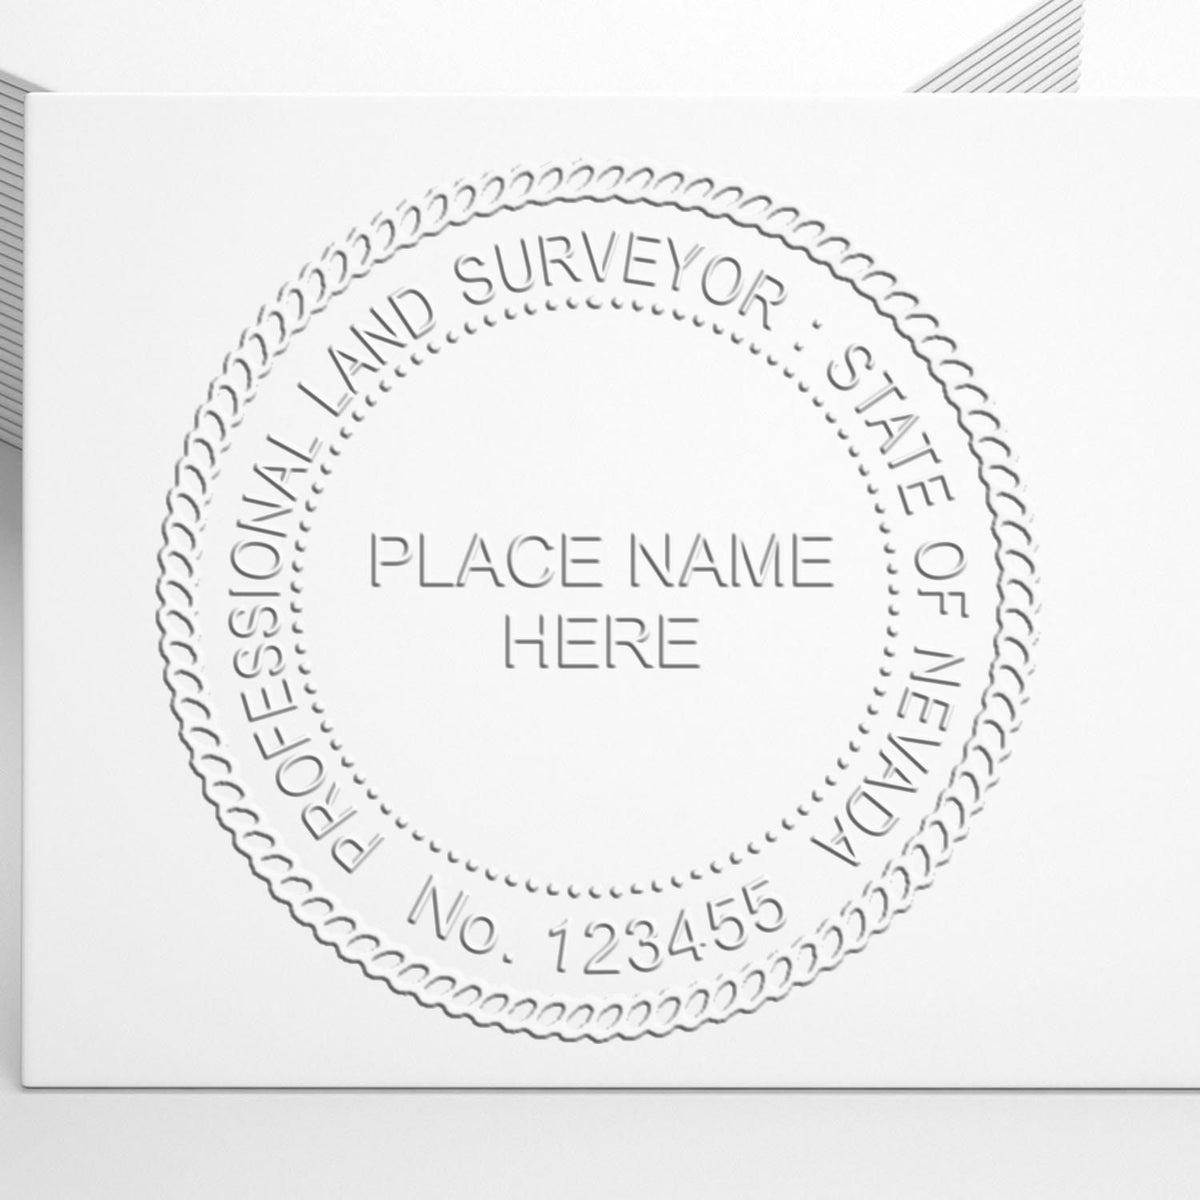 A stamped impression of the Long Reach Nevada Land Surveyor Seal in this stylish lifestyle photo, setting the tone for a unique and personalized product.